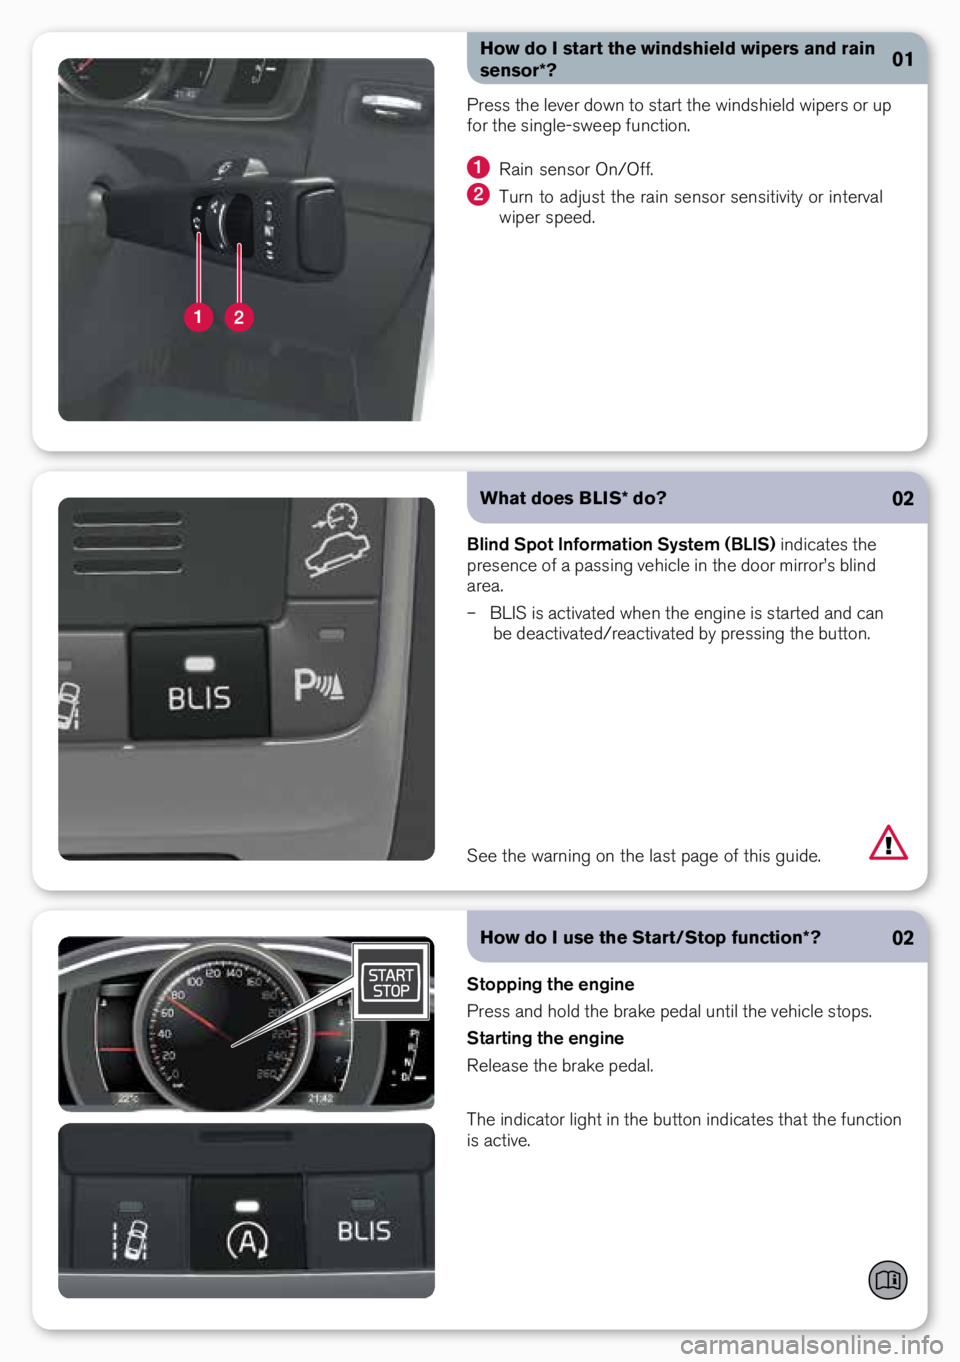 VOLVO S80 2015  Quick Guide 02
Blind Spot Information System (BLIS) indicates the 
p\fesence of a passing vehicle in the doo\f mi\f\fo\f’s blind 
a\fea.   
 
– bLiS is activated when the engine is sta\fted and can 
be deacti